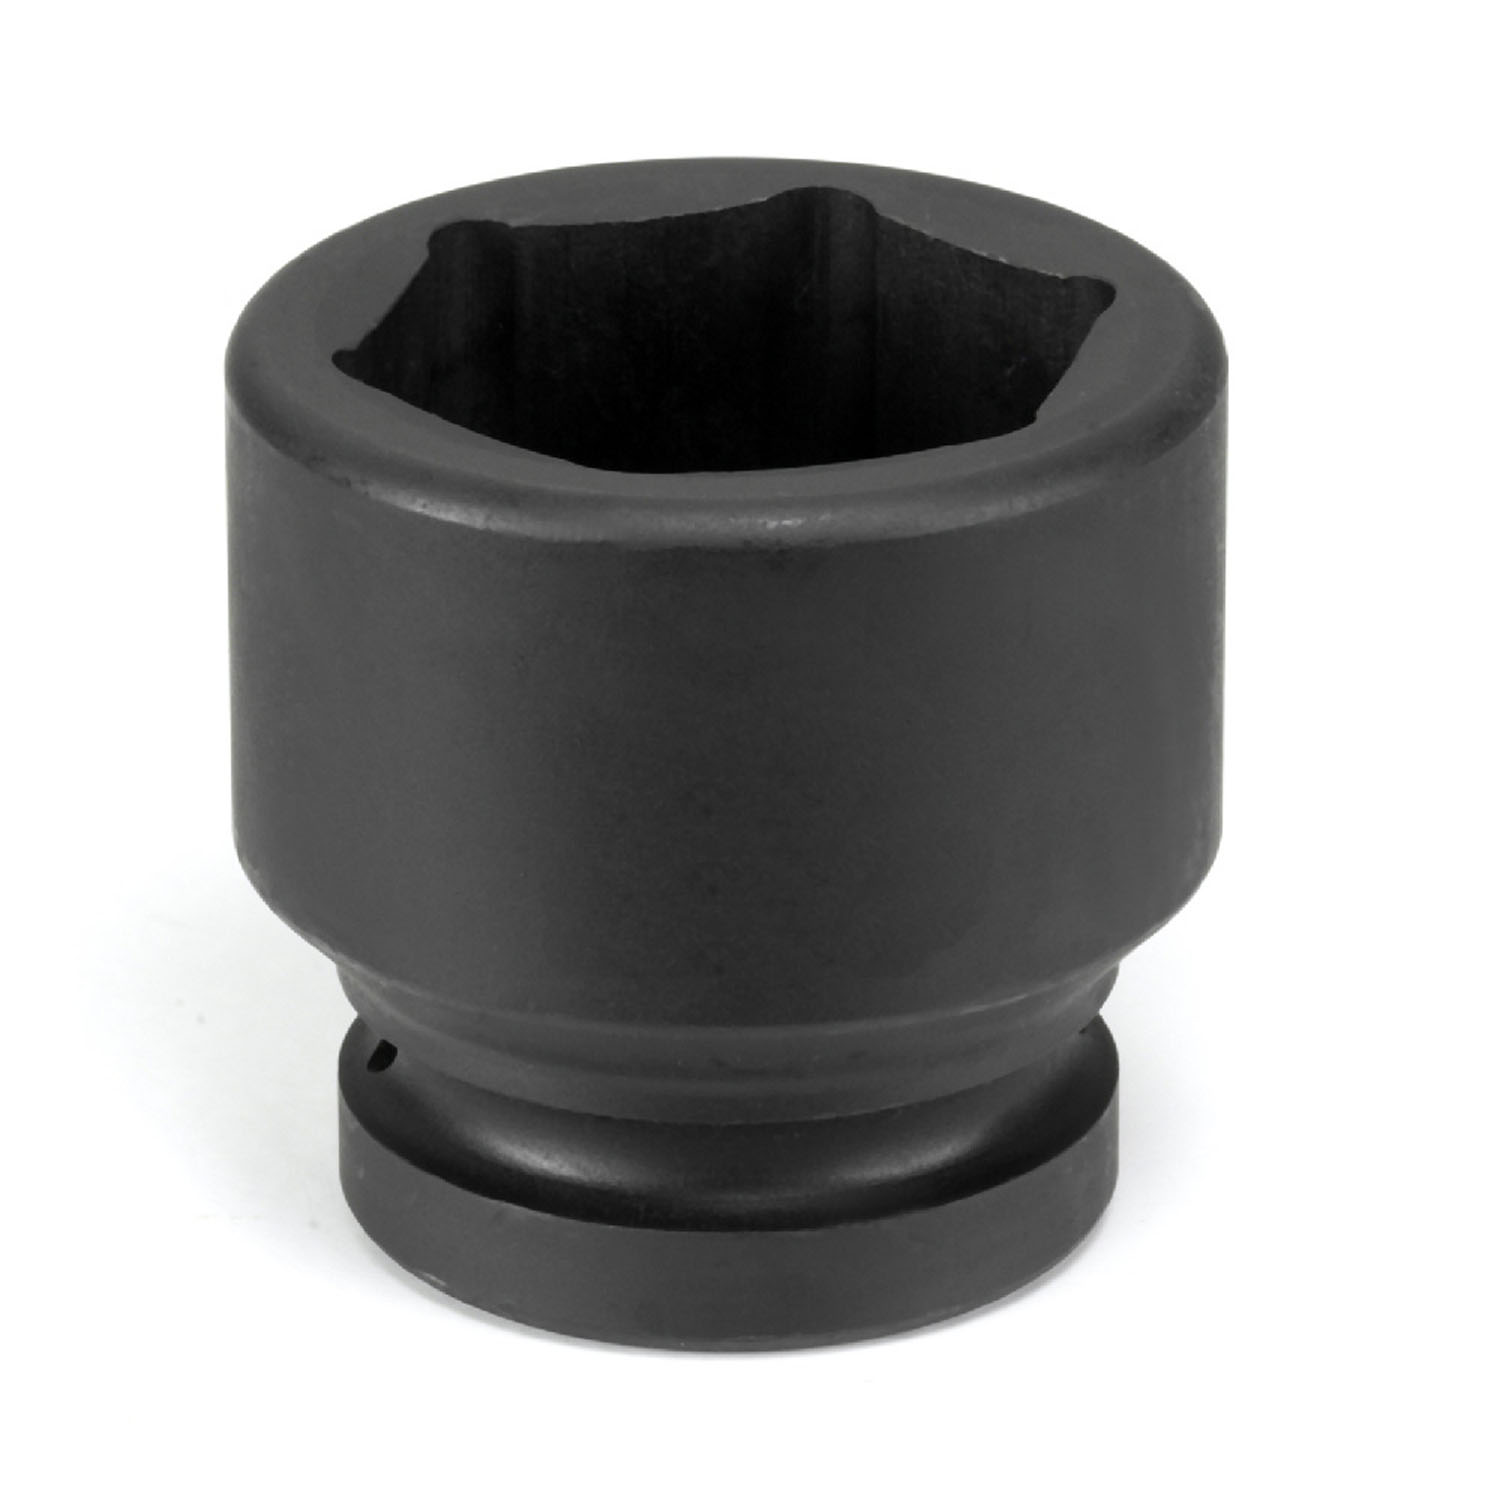 1 IN. DRIVE STANDARD LENGTH IMPACT 6 POINT METRIC SOCKETS (MULTIPLE SIZES AVAILABLE)